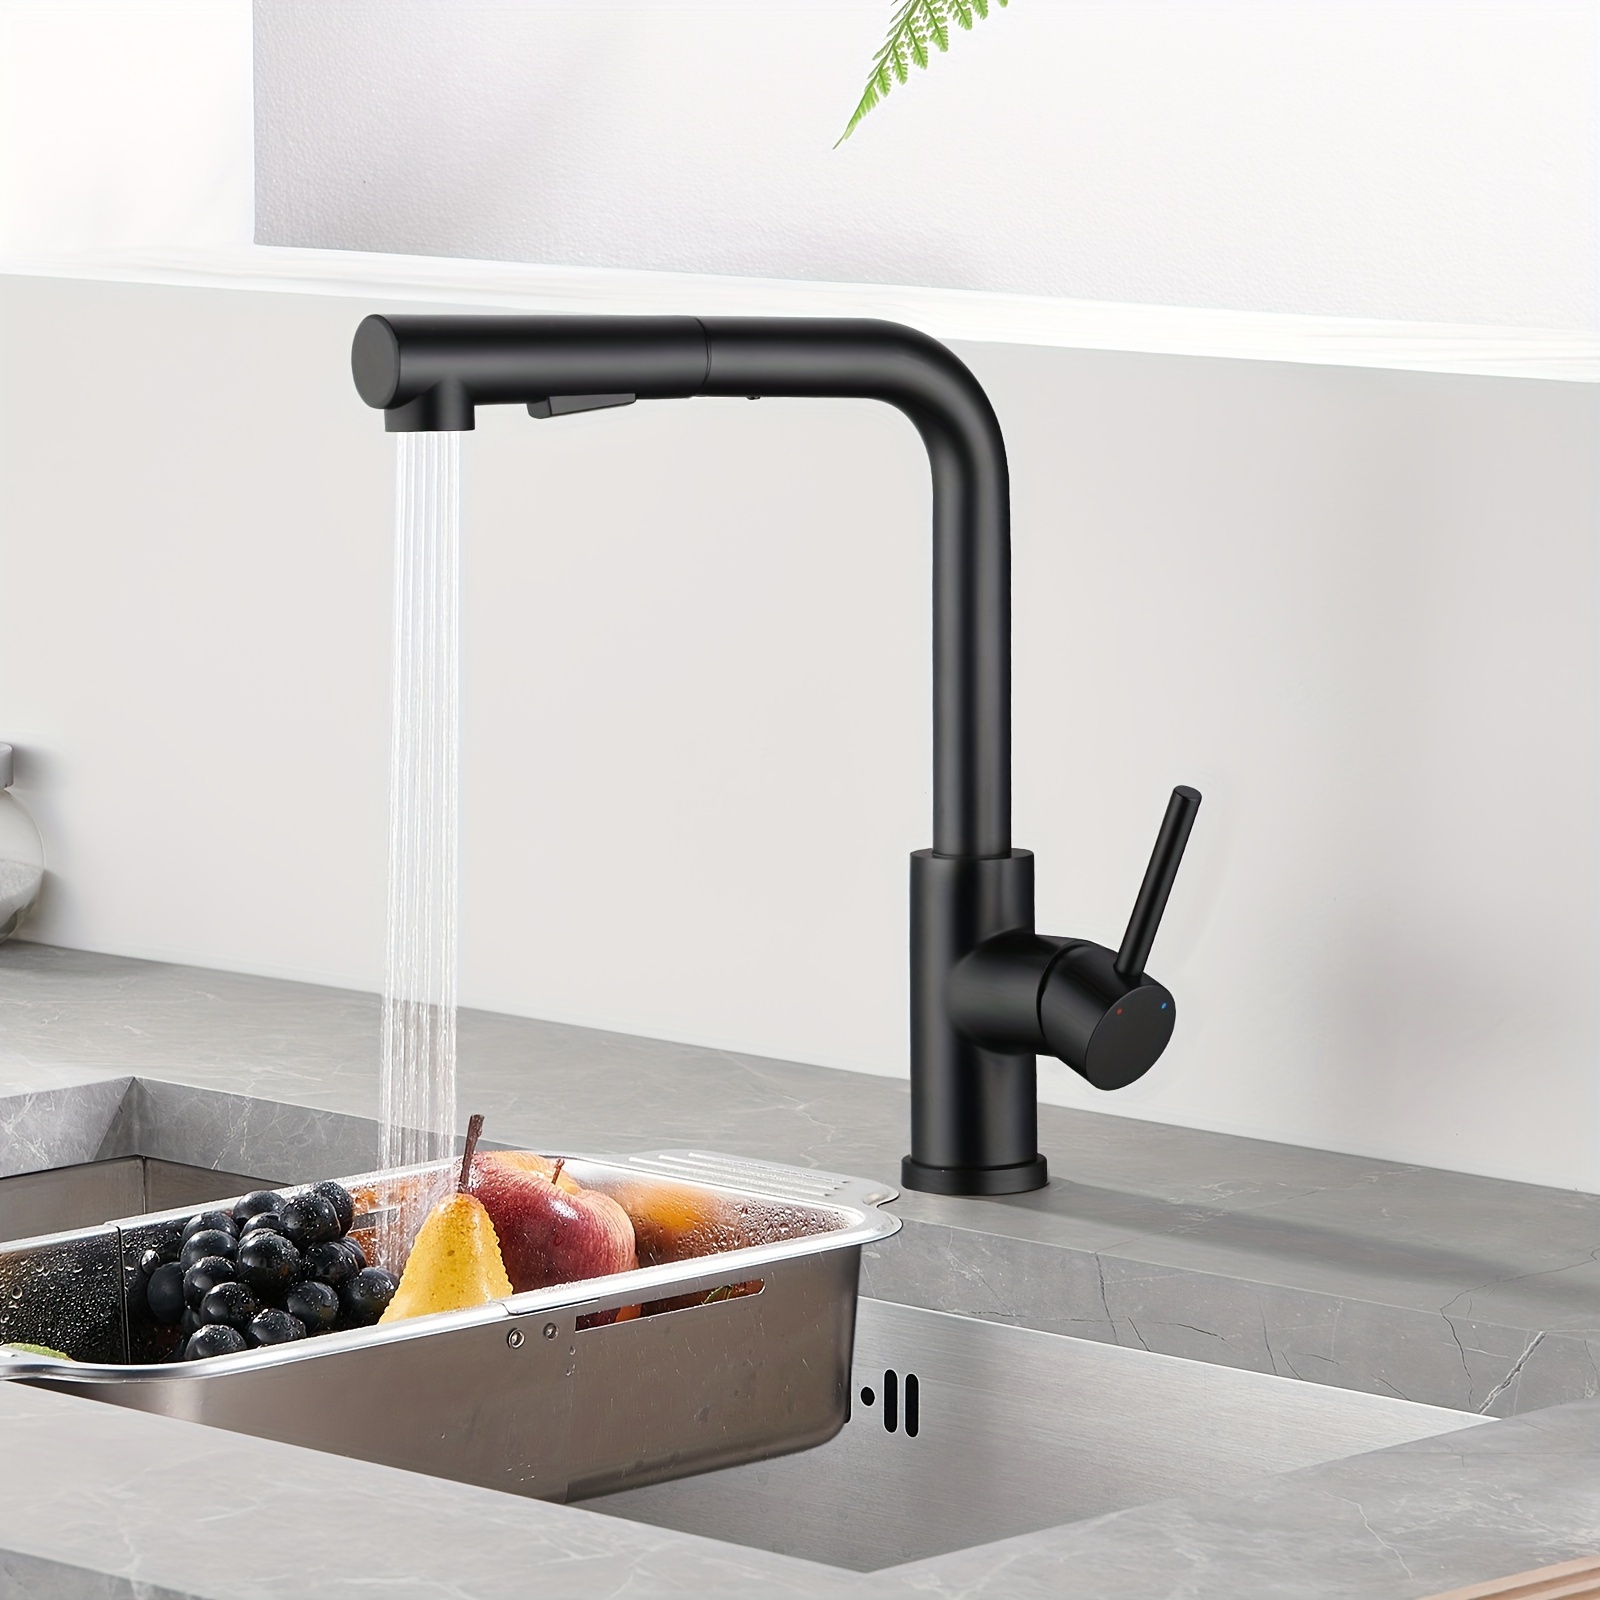 

Low Pressure Tap Kitchen Pull-out, Kitchen Tap Black With Shower 2 Jet, 360° Rotatable Kitchen Tap Low Pressure Tap With 3 Connections For Boiler, Sink Mixer Made Of Stainless Steel